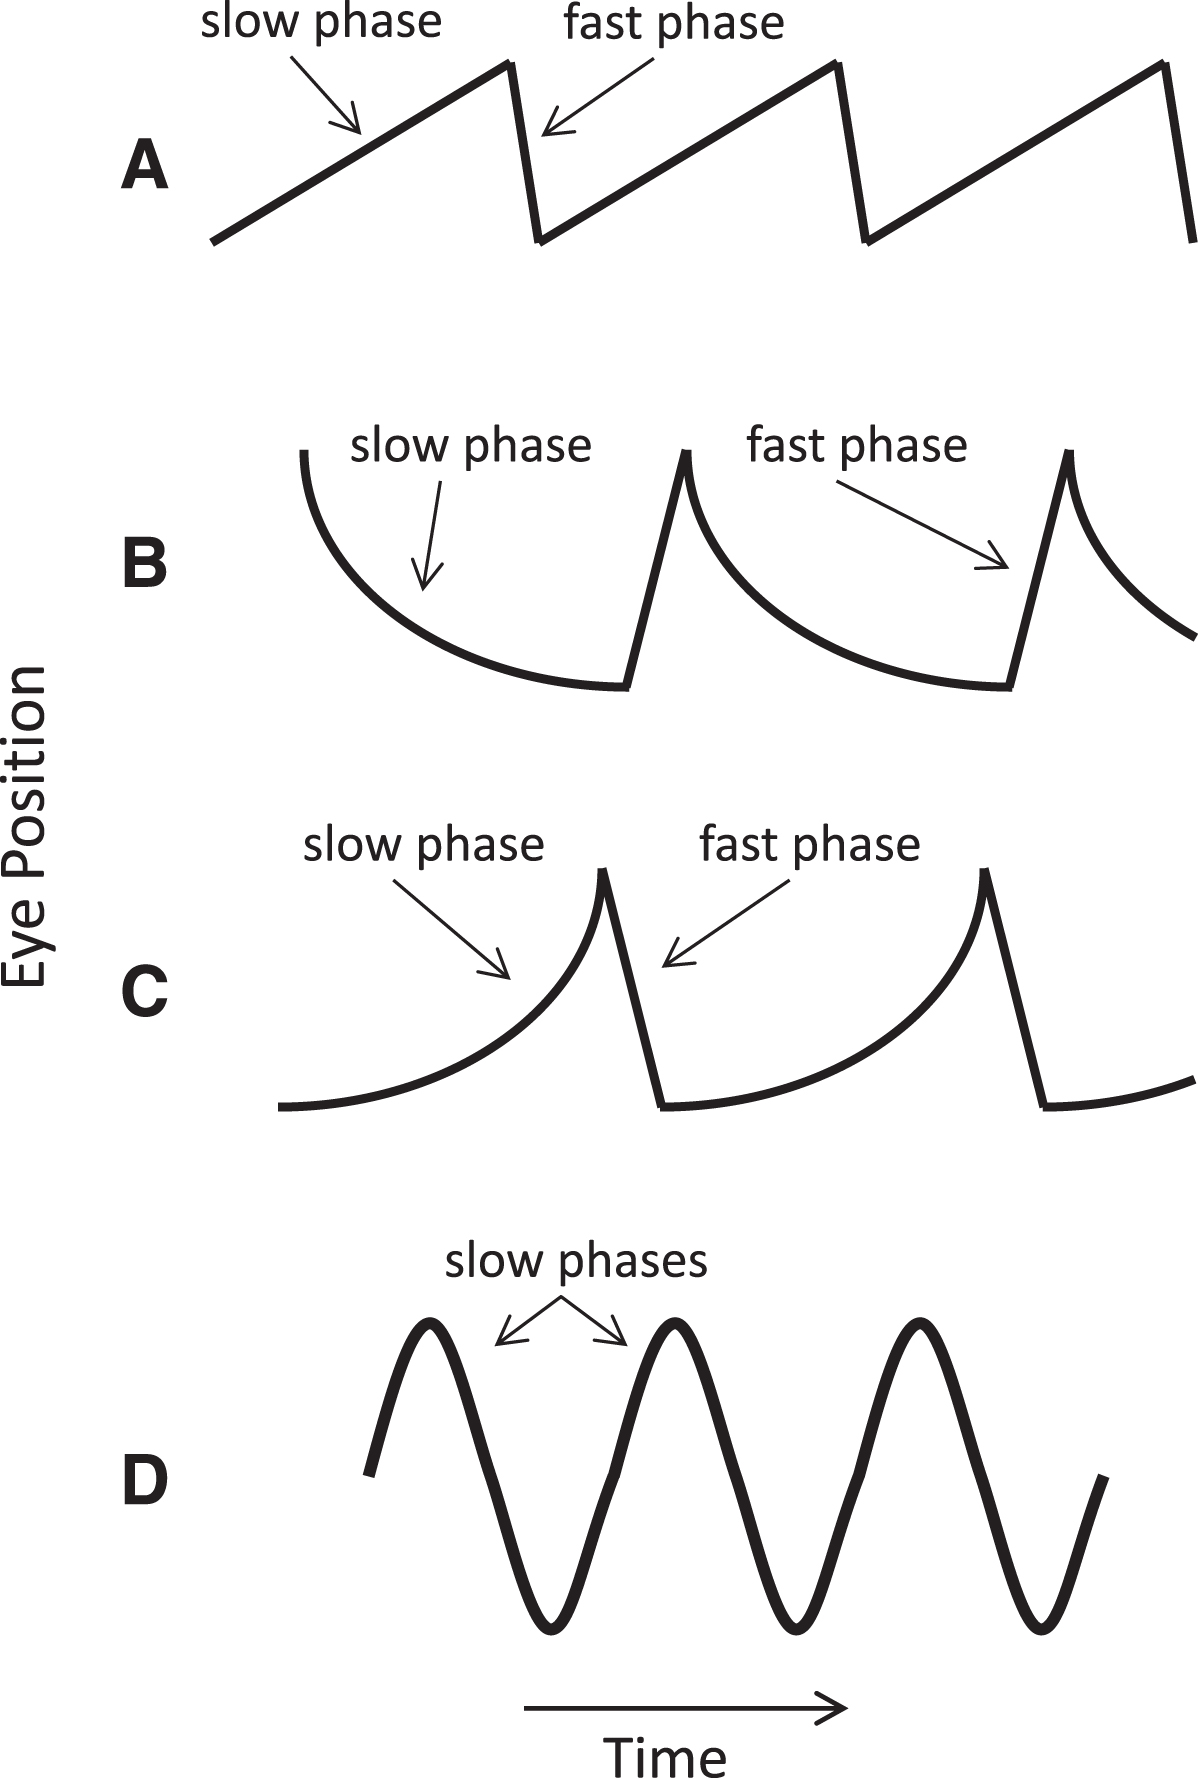 Common nystagmus slow-phase waveforms. (A) Constant velocity (linear) waveform, with added fast phases producing a sawtooth appearance characteristic of vestibular or cerebral hemispheric disease. (B) Decreasing velocity waveform with a negative exponential time course typical of pathologic gaze-evoked nystagmus from an impaired neural integrator. (C) Increasing velocity waveform suggesting an unstable neural integrator. (D) Pendular nystagmus, consisting of only slow phases. Adapted from Leigh and Zee [109].